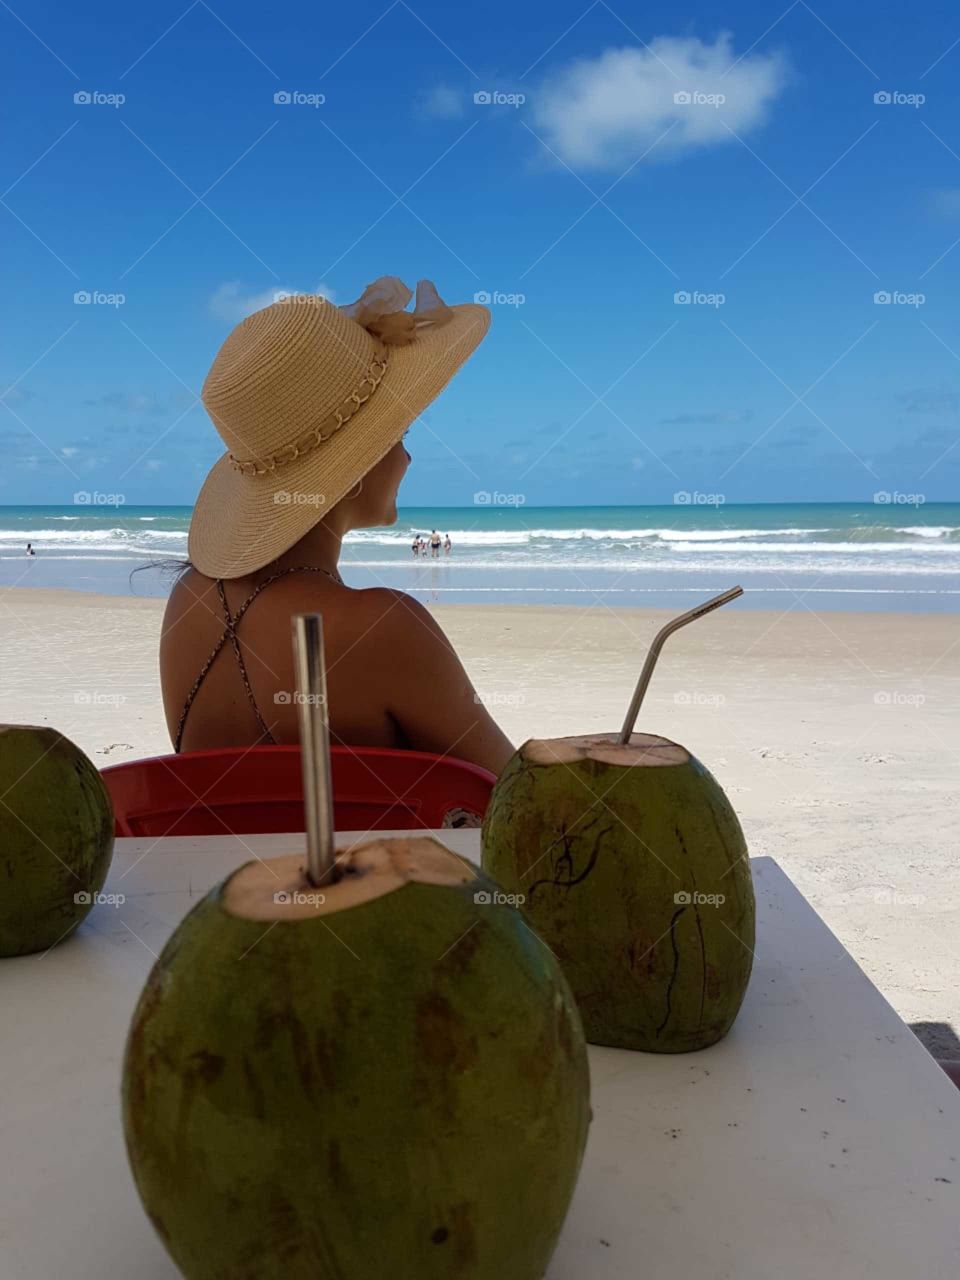 A coconut, a reusable straw, the sea and nothing else.